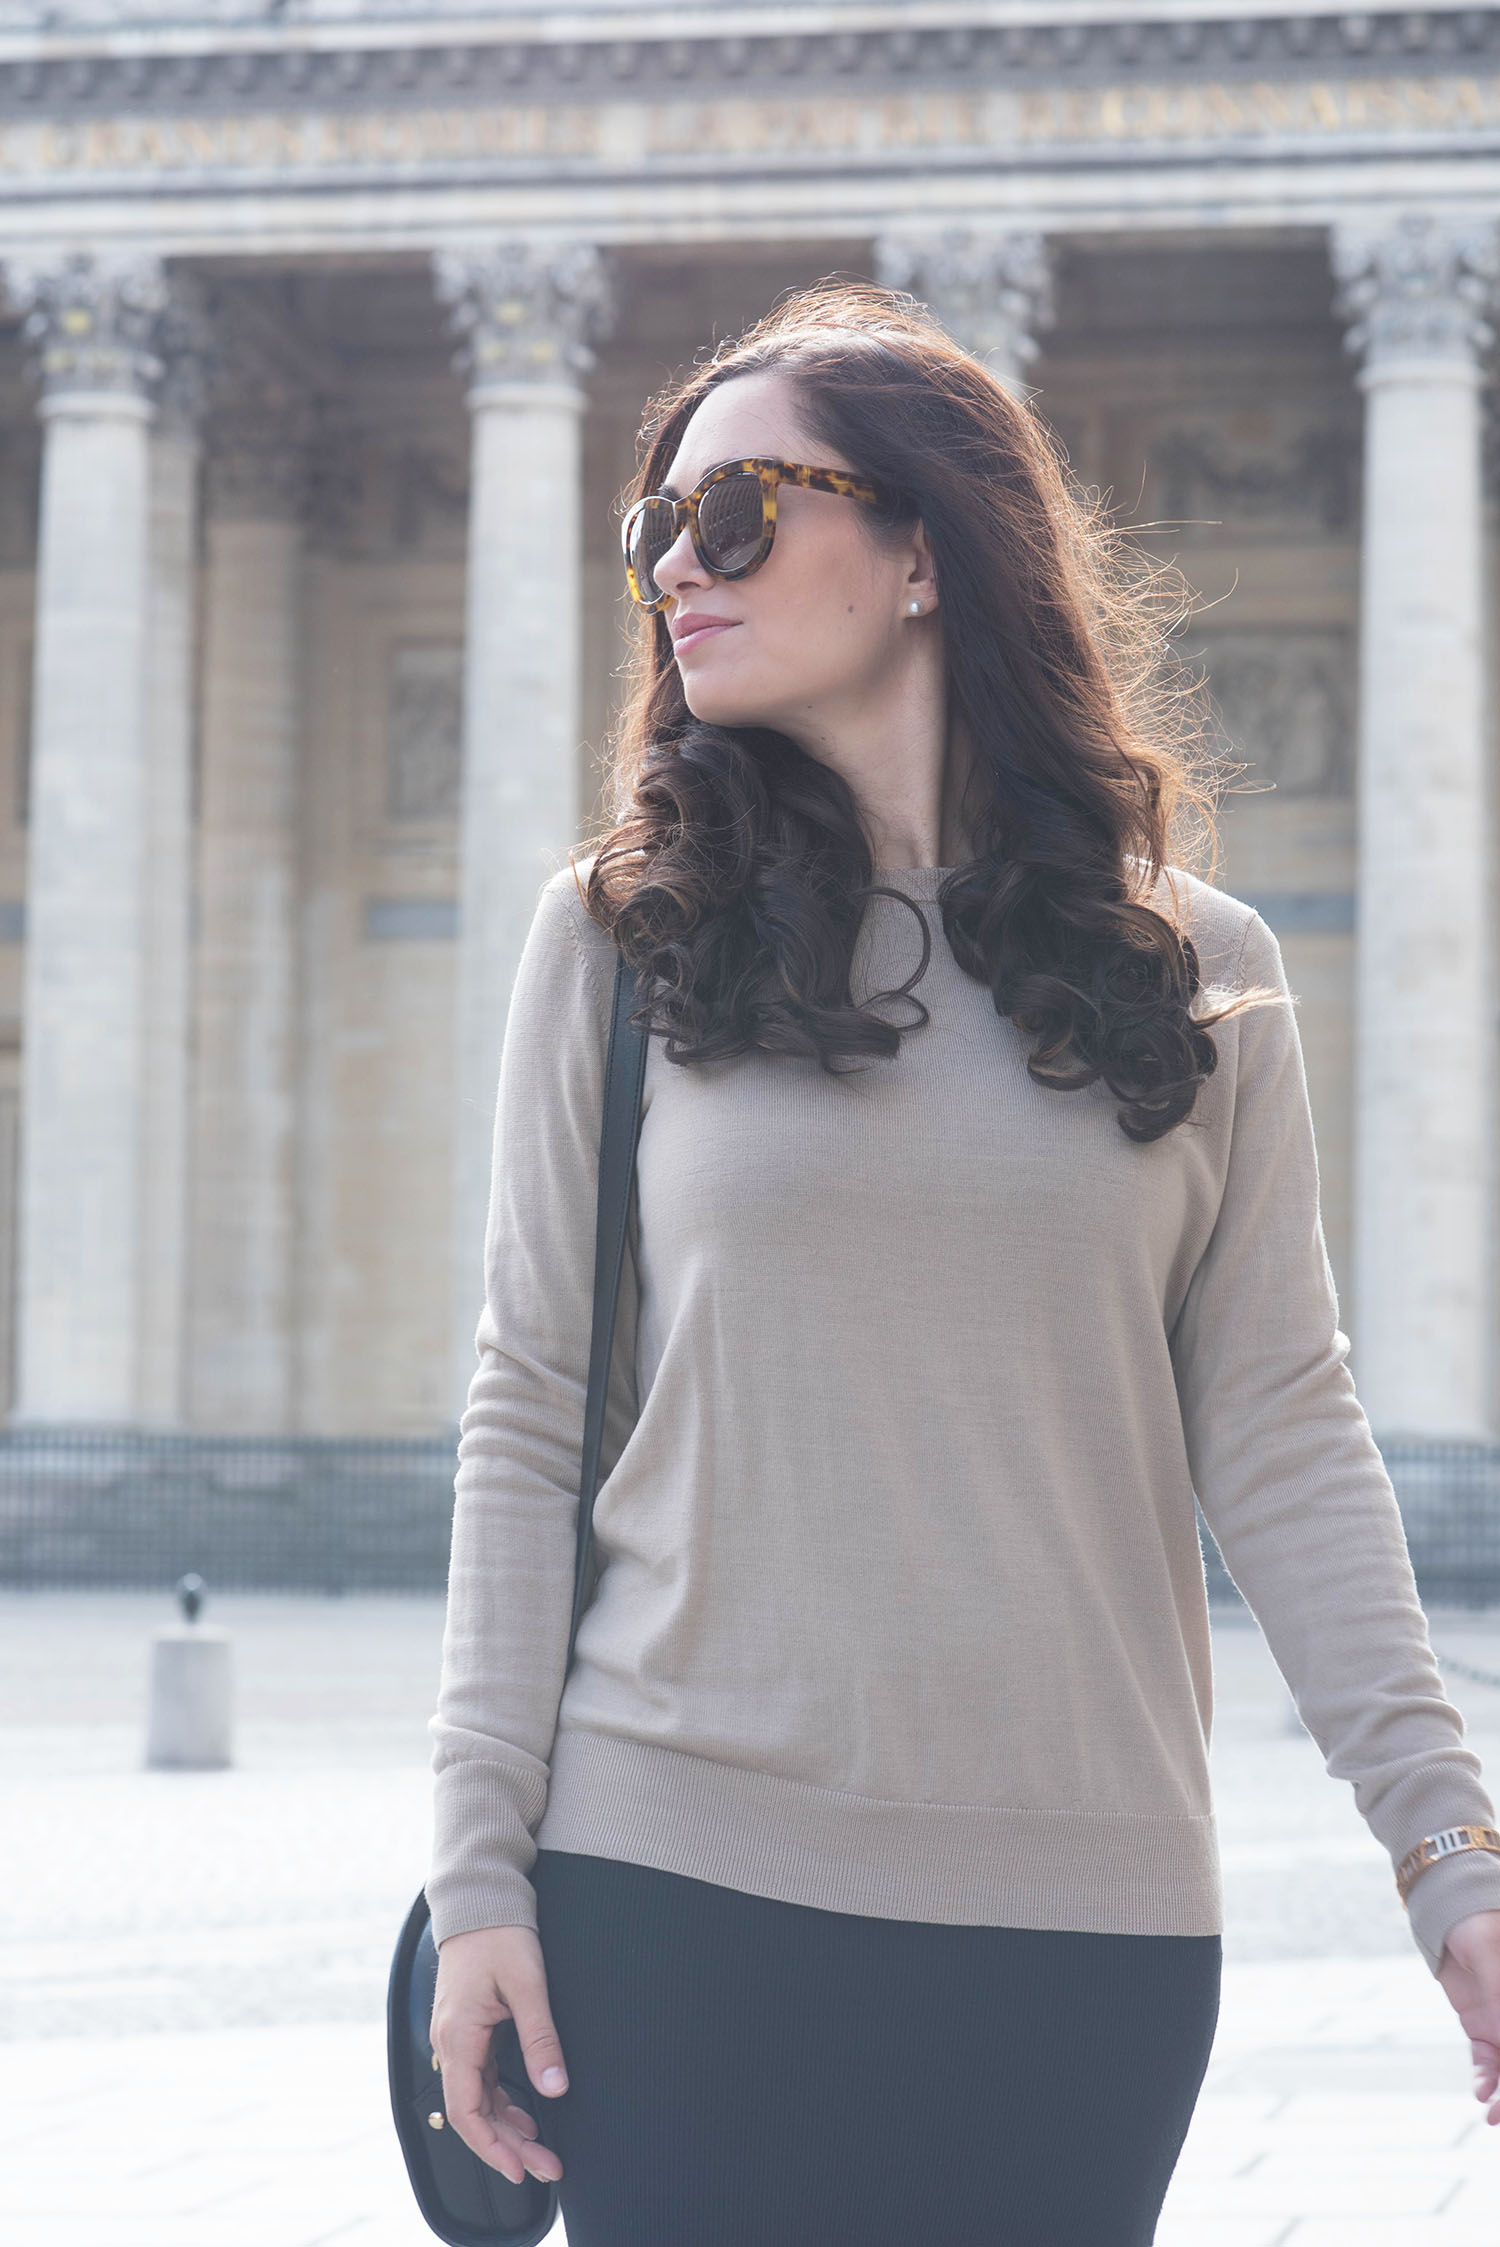 Portrait of fashion blogger Cee Fardoe of Coco & Vera at the Pantheon in Paris wearing CC Lifestyles pearl earrings and a Uniqlo camel sweater